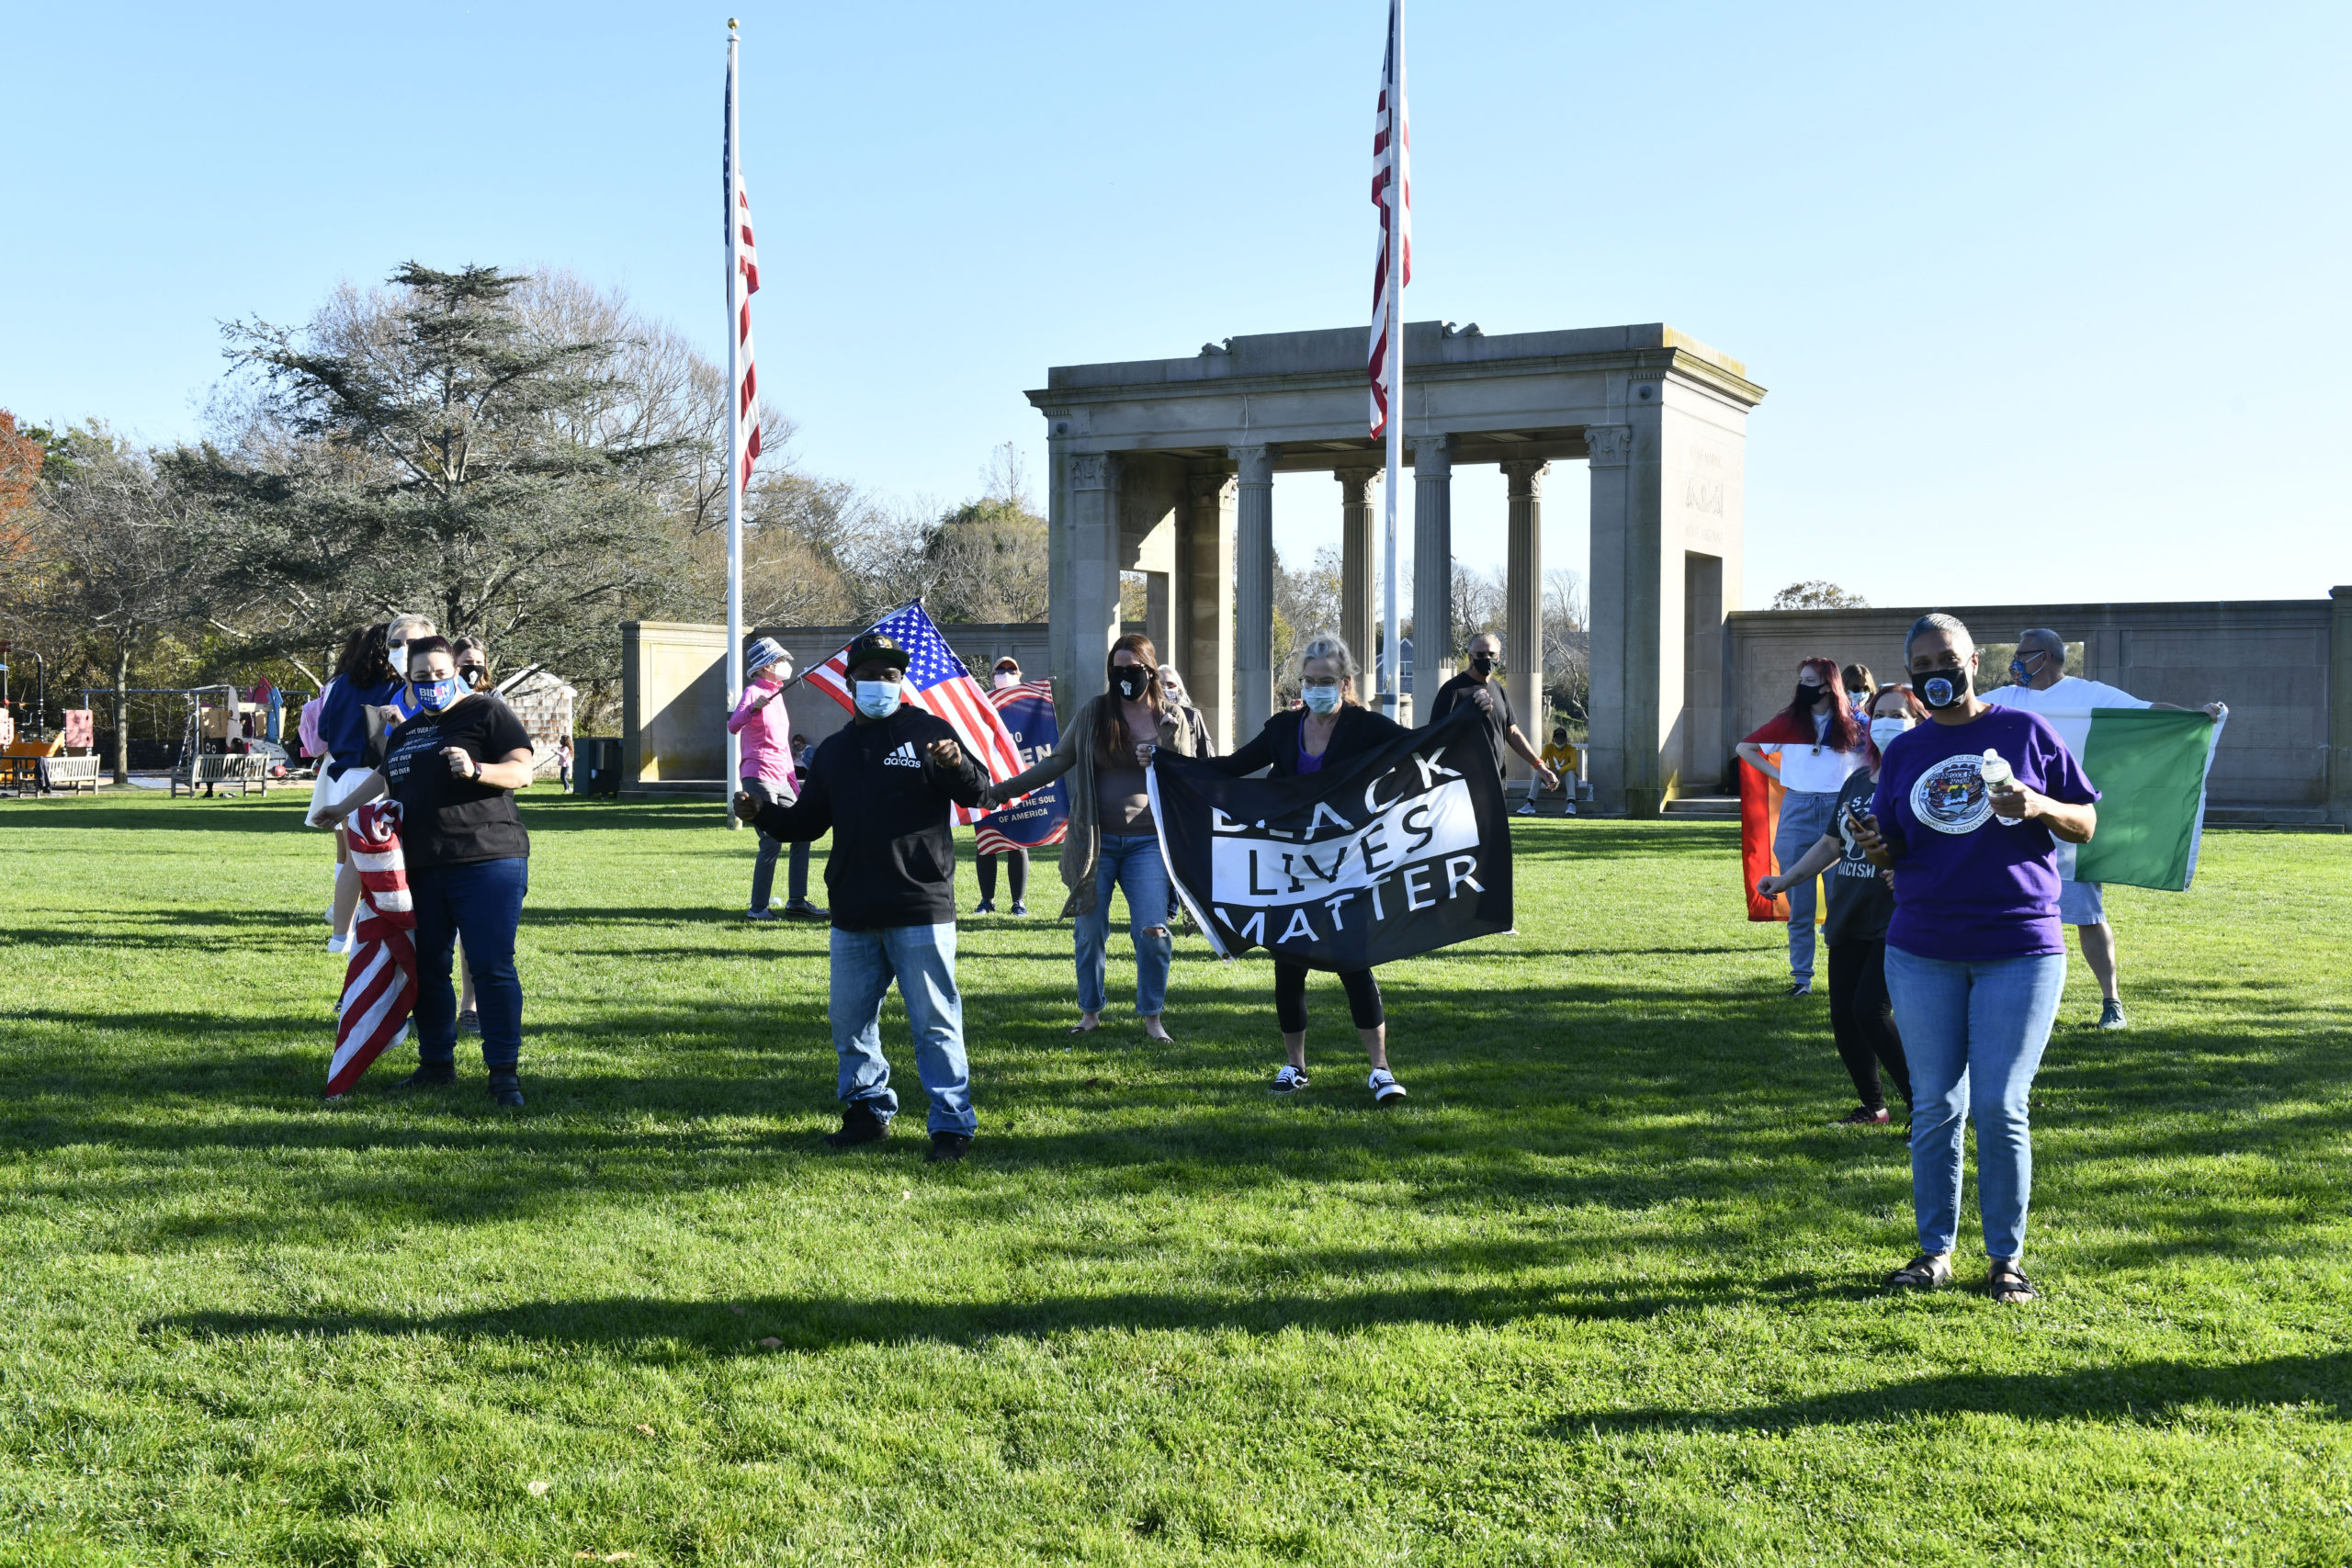 Joe Biden supporters celebrate his victory in Agawam Park on Sunday.   